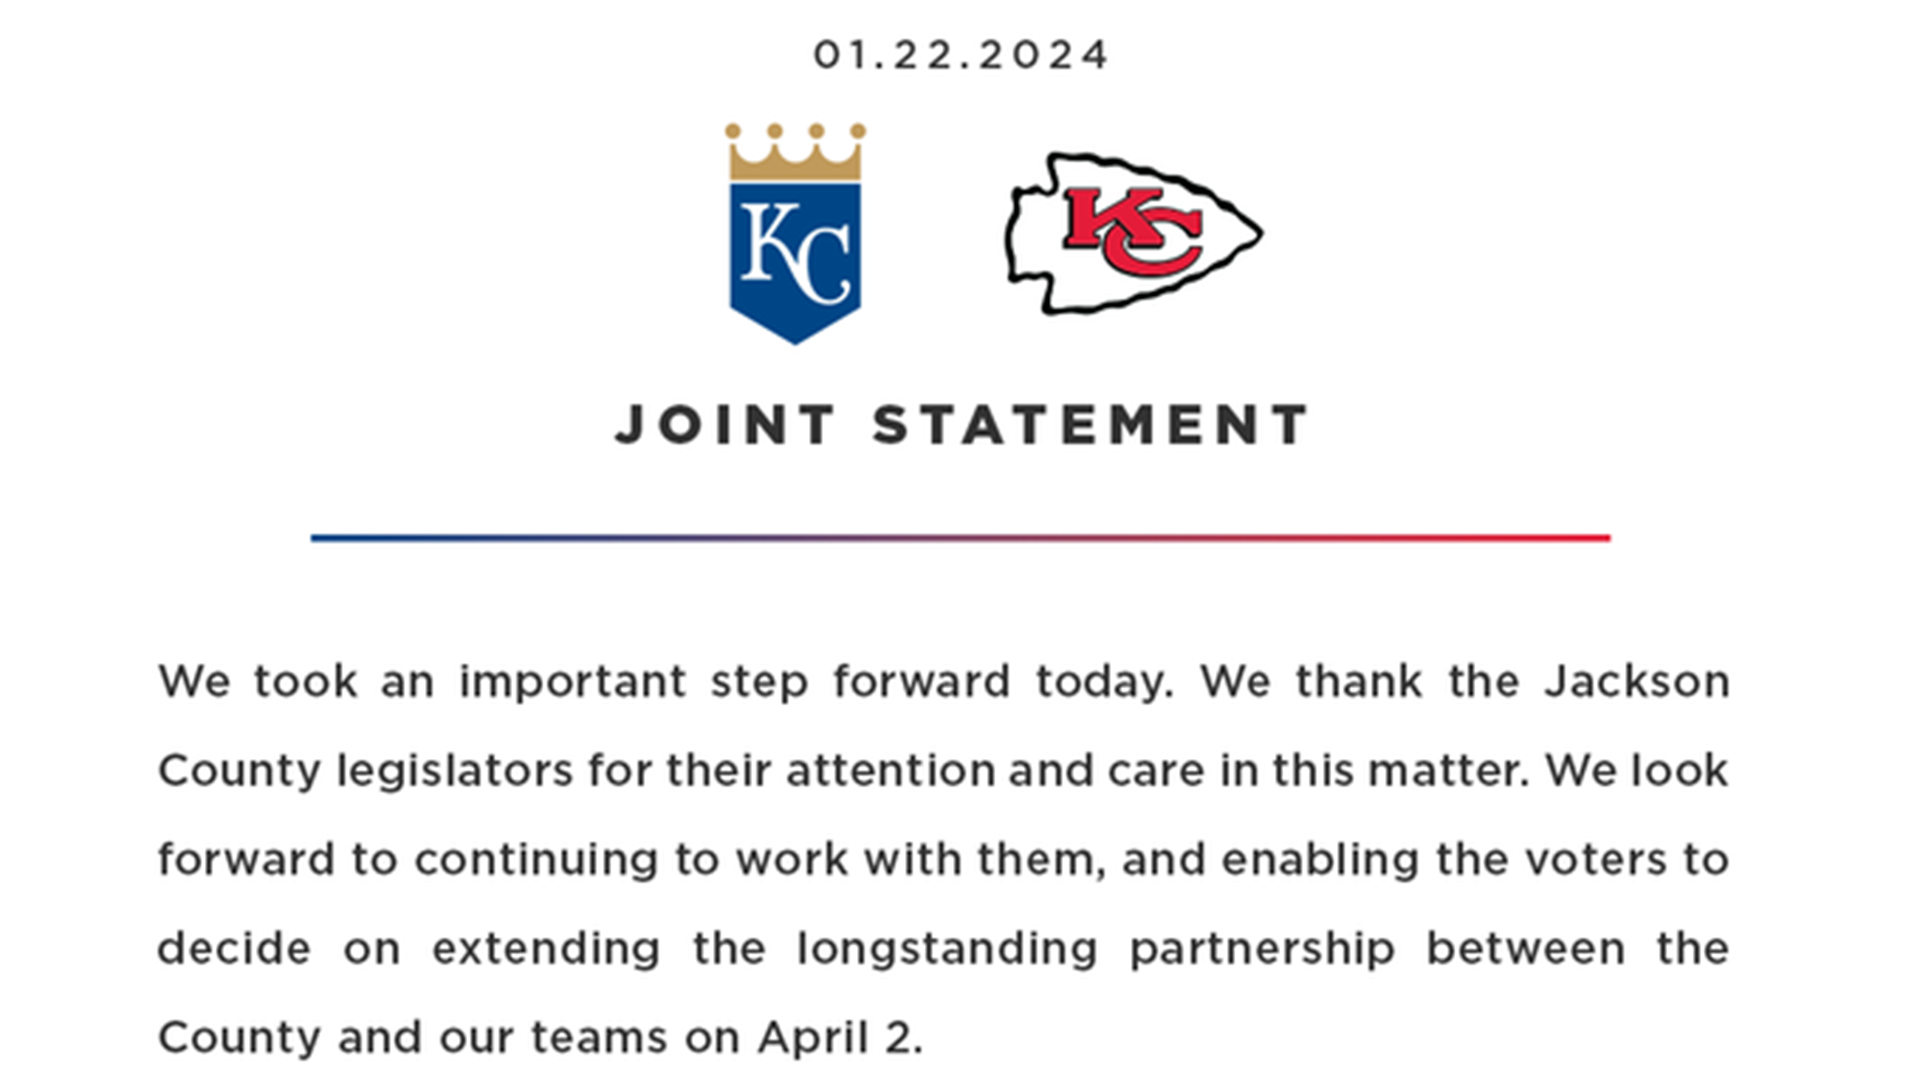 Royals and Chiefs joint statement